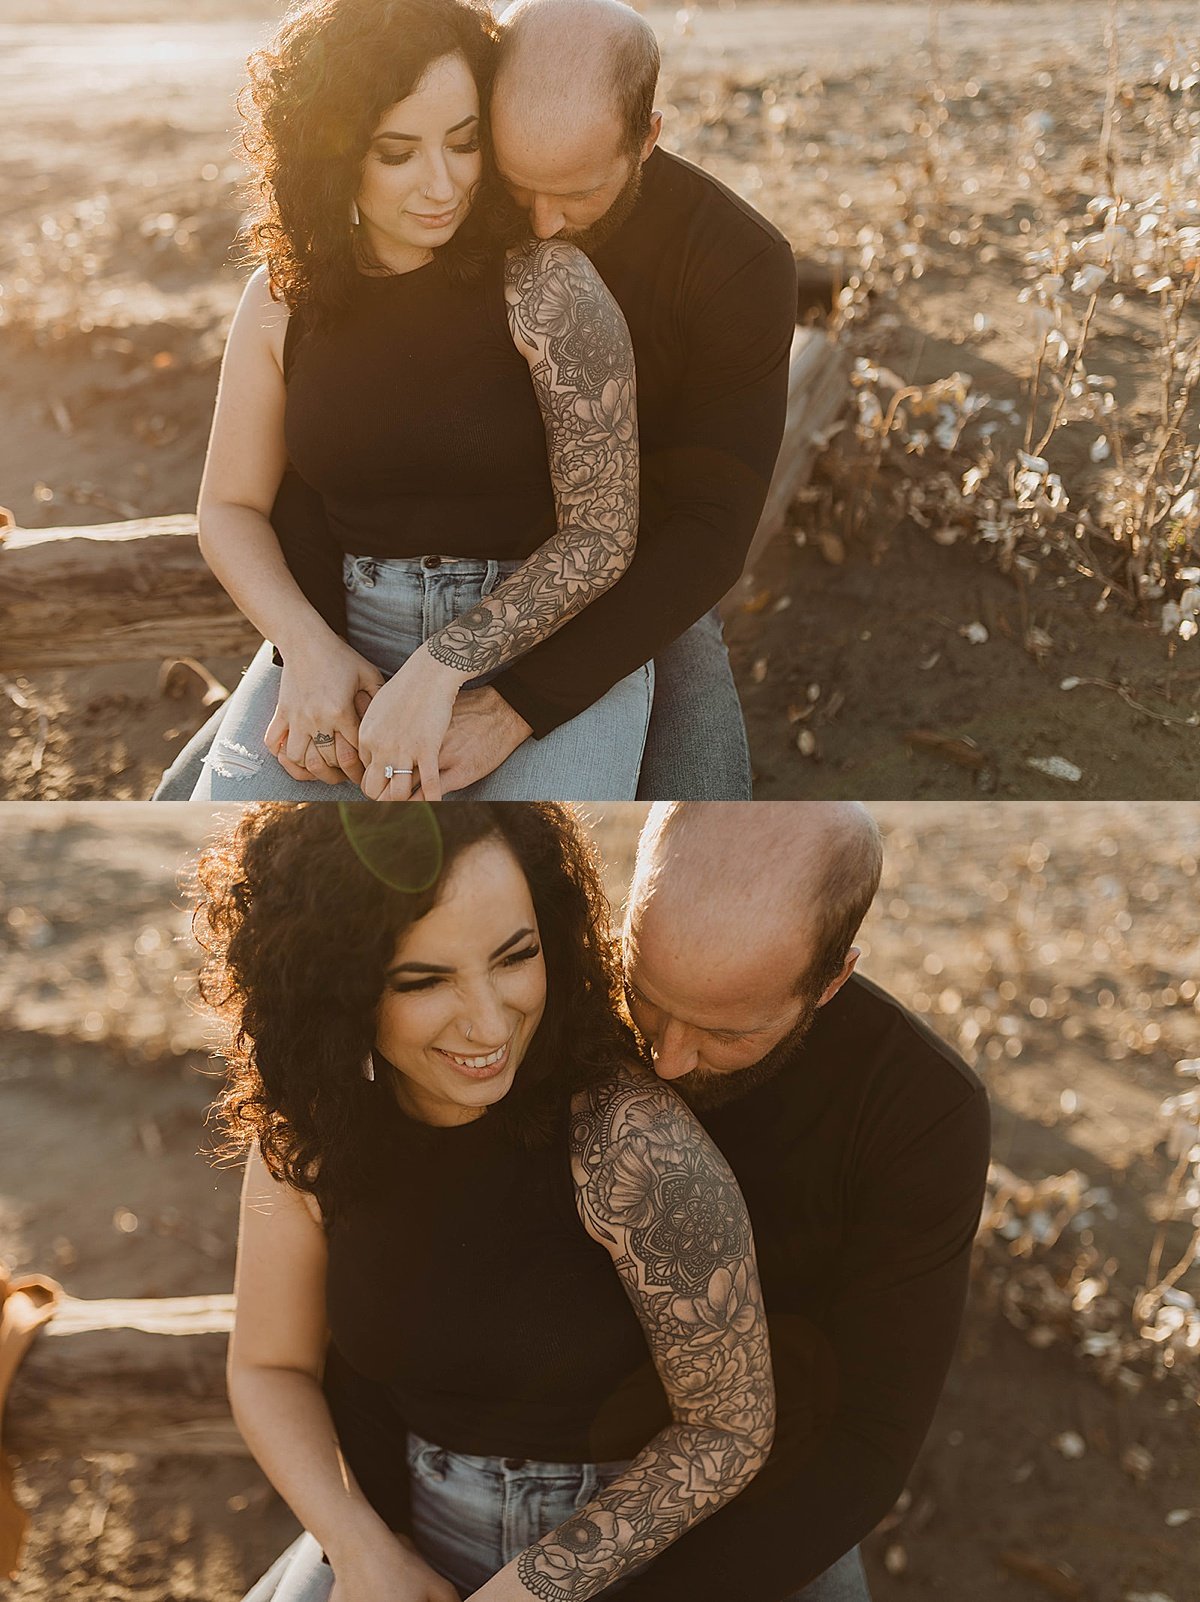  outdoorsy couple with hip tattoos pose and smile during warm sunset engagement shoot 